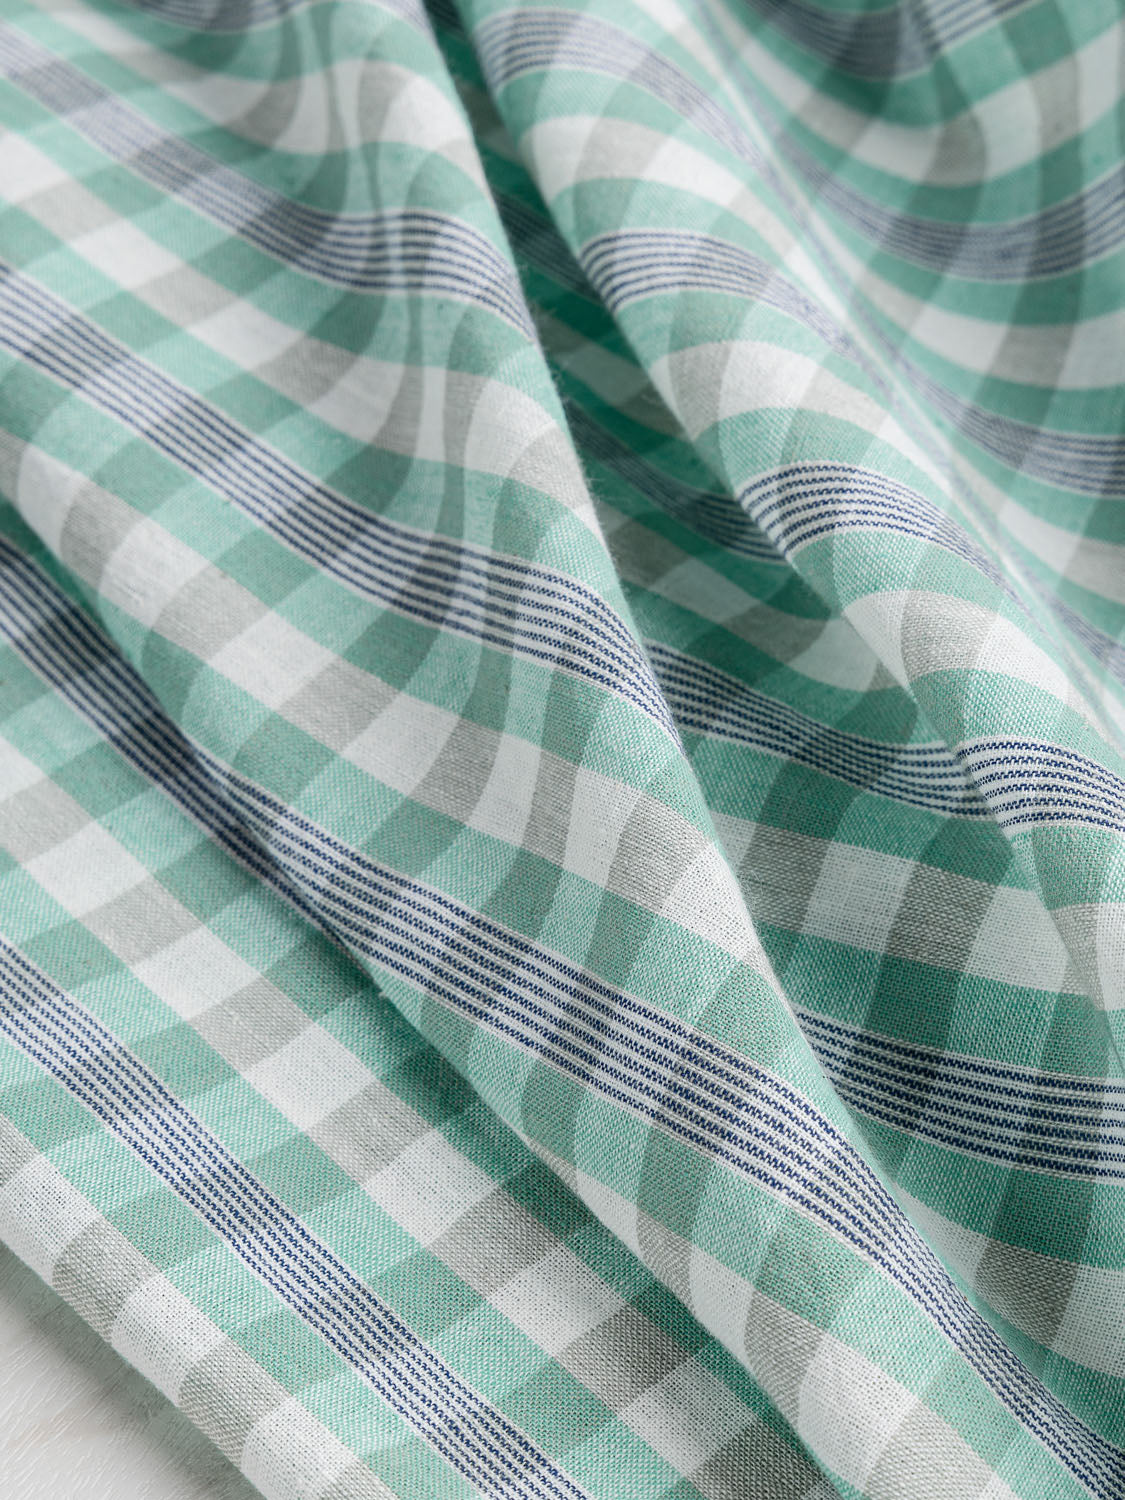 One-way wicking fabric - Specialty Fabrics Review